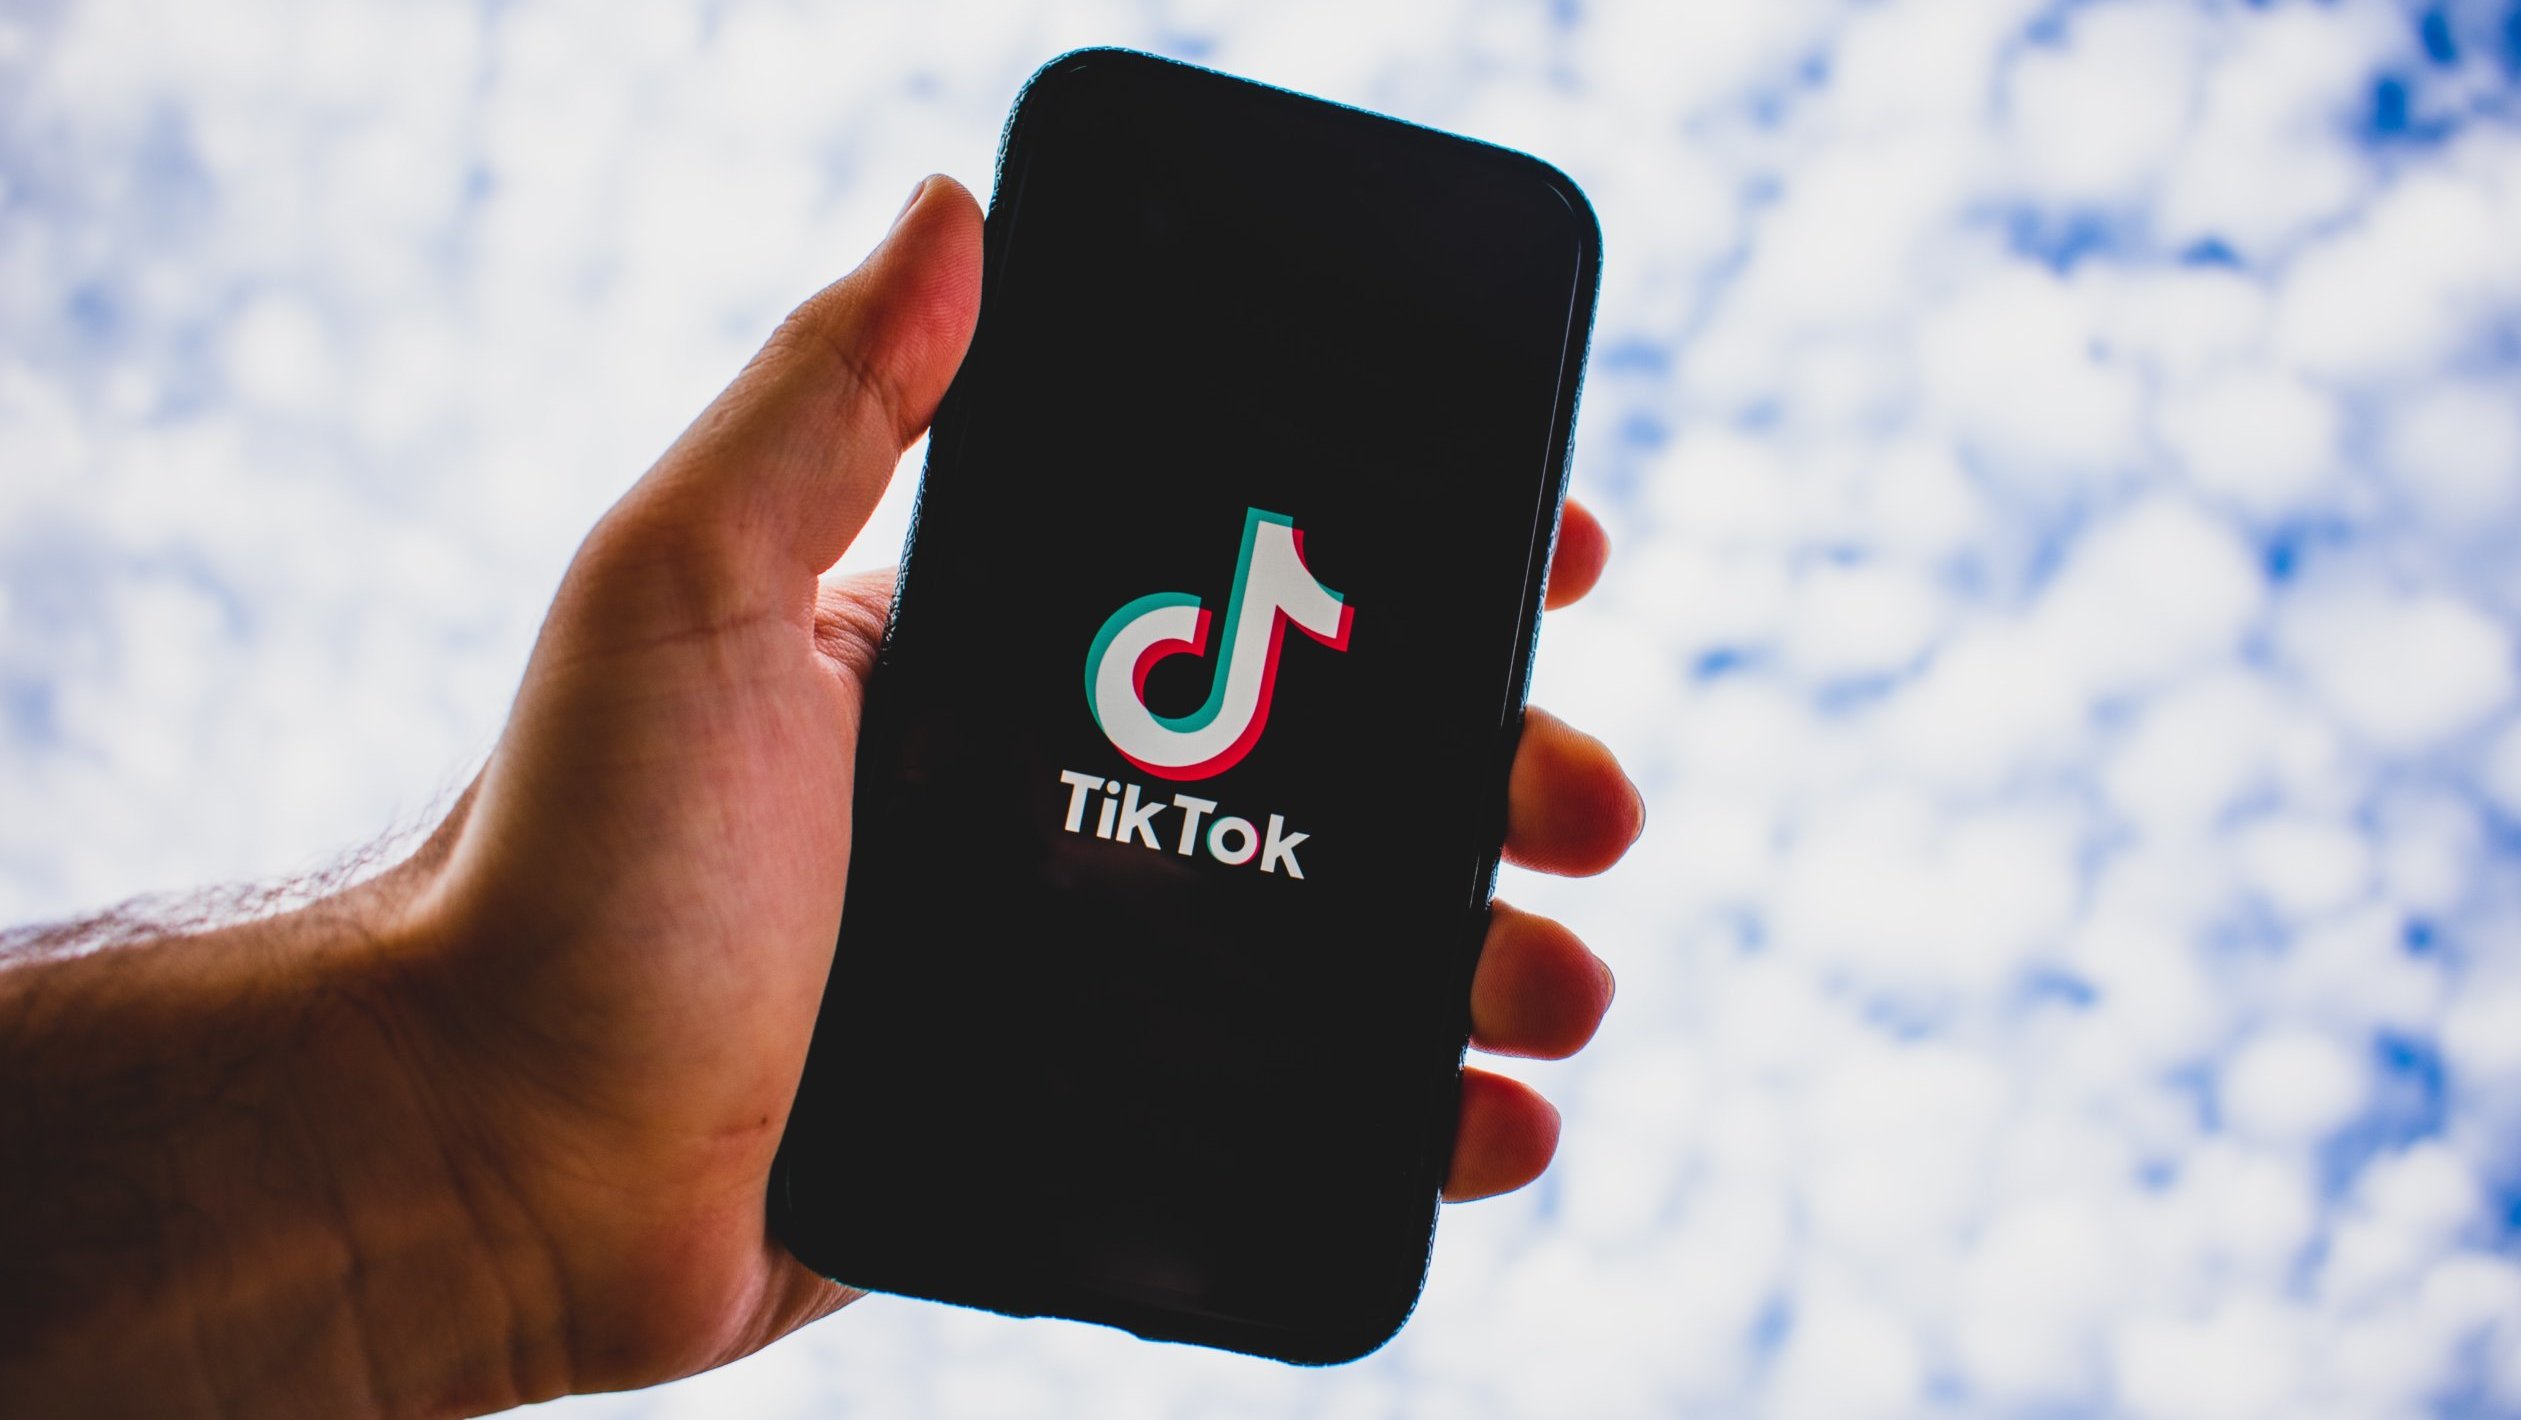 TikTok’s EU business grew by 477% in 2021 – with a loss of 896 million.  USD before tax